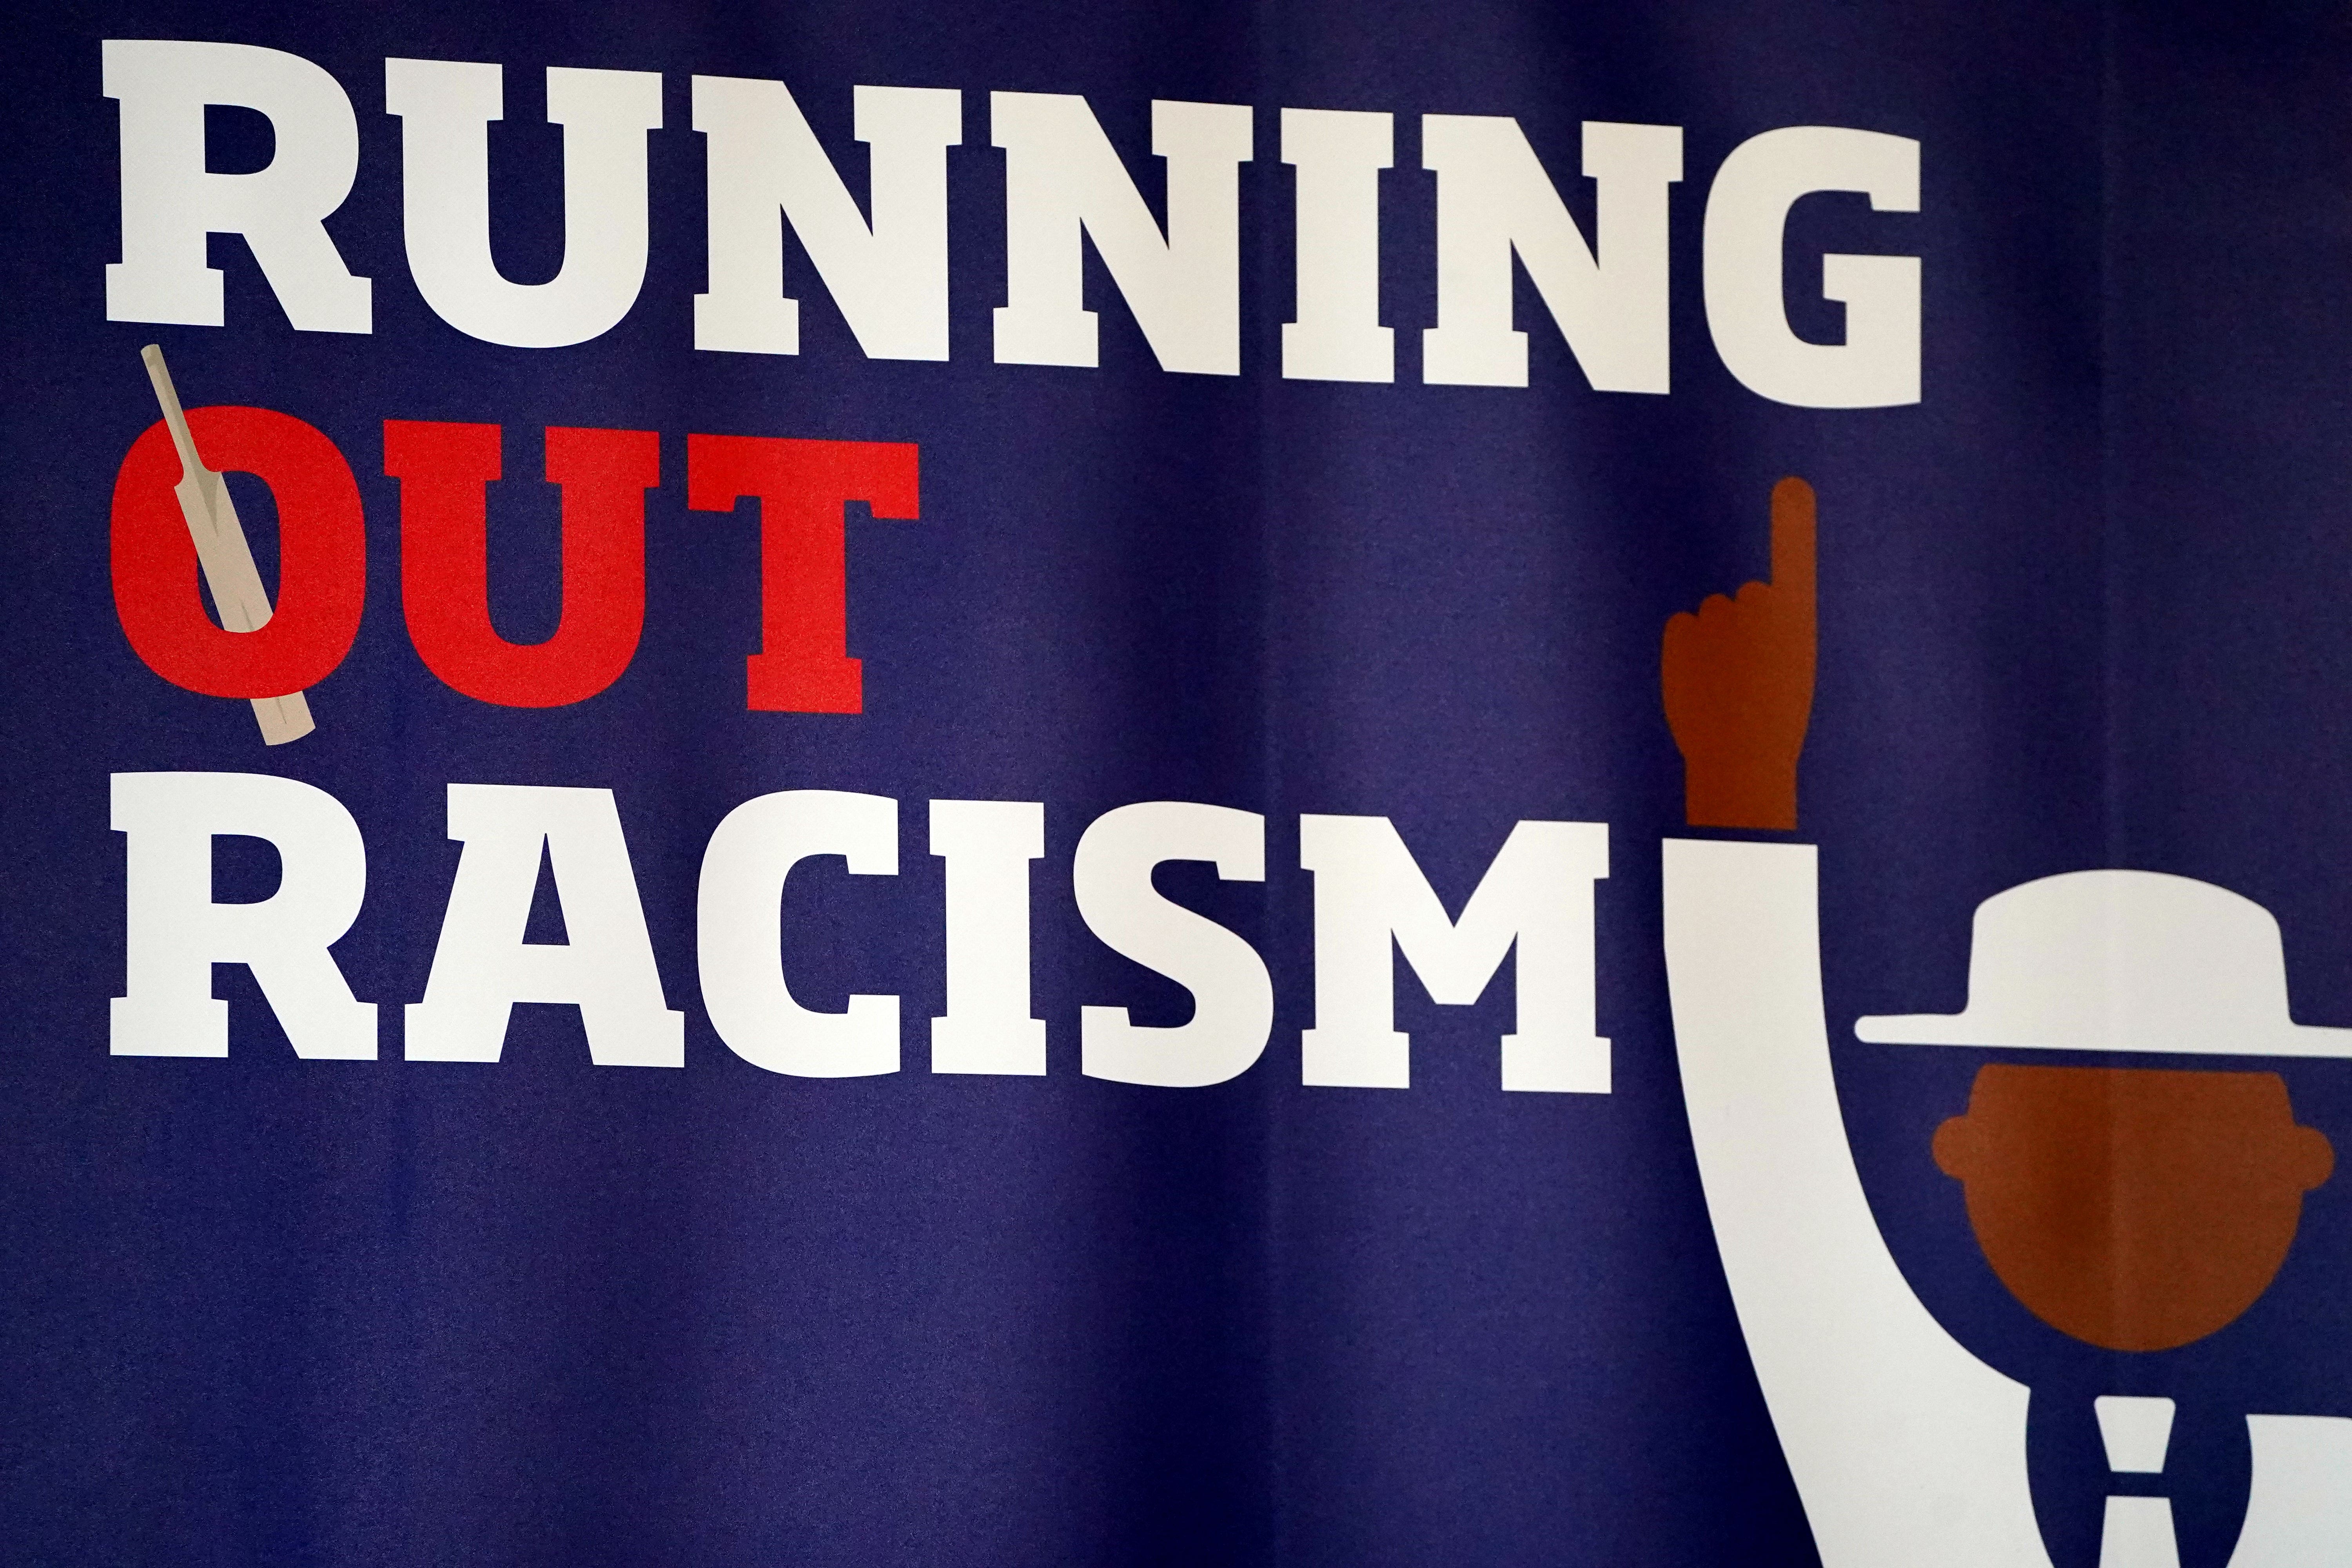 Four members of Cricket Scotland’s anti-racism group have resigned (Andrew Milligan/PA)